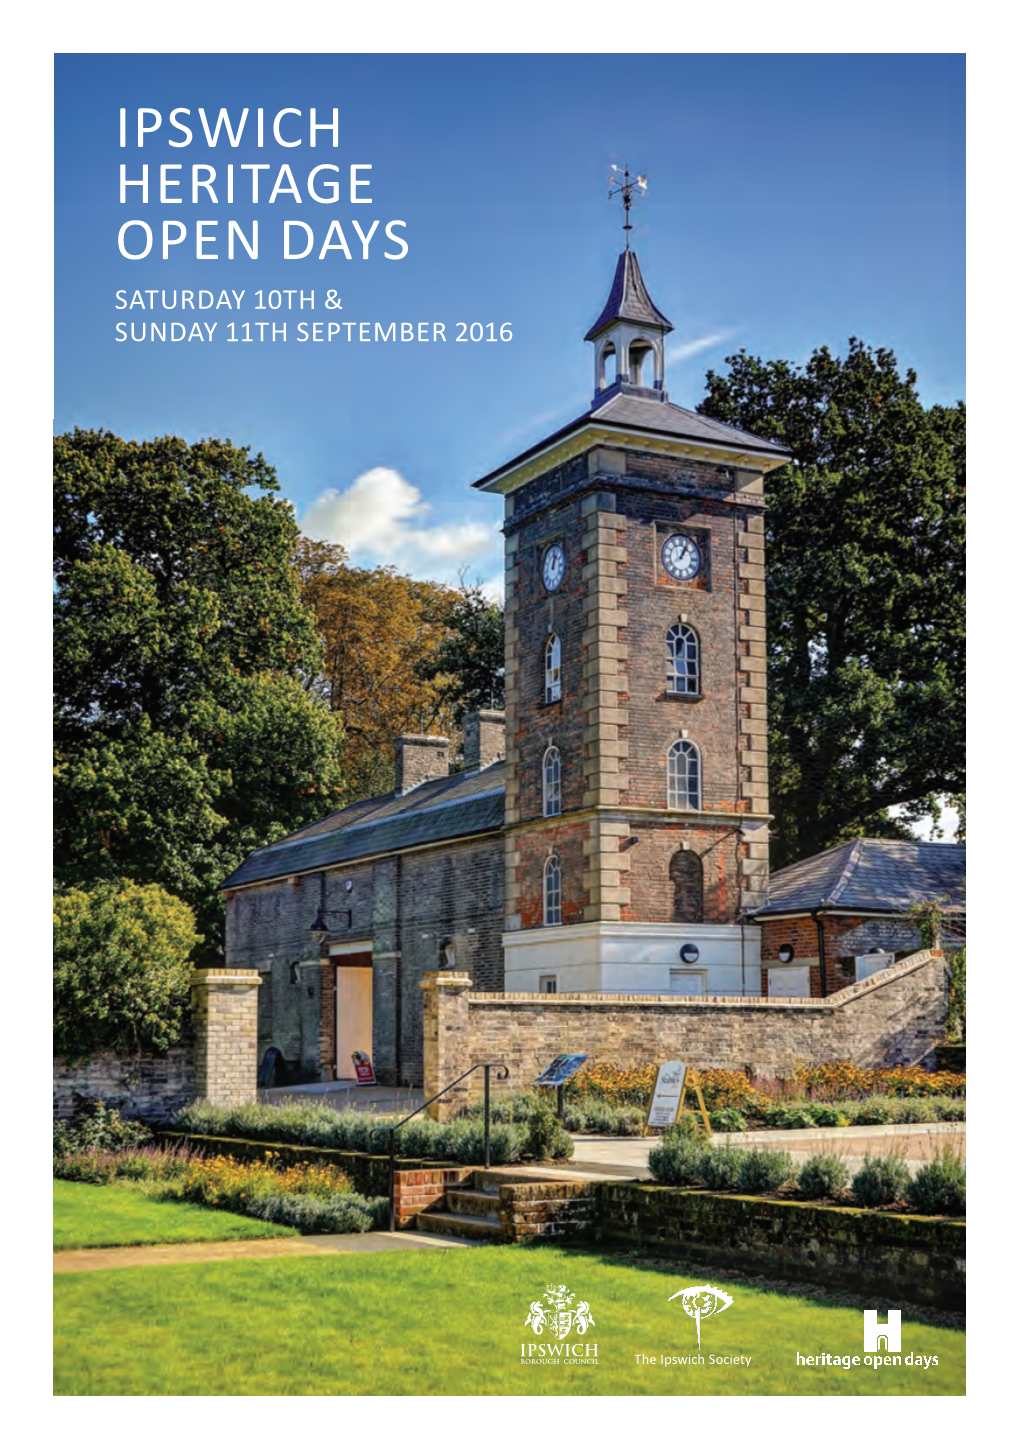 Ipswich Heritage Open Days Saturday 10Th & Sunday 11Th September 2016